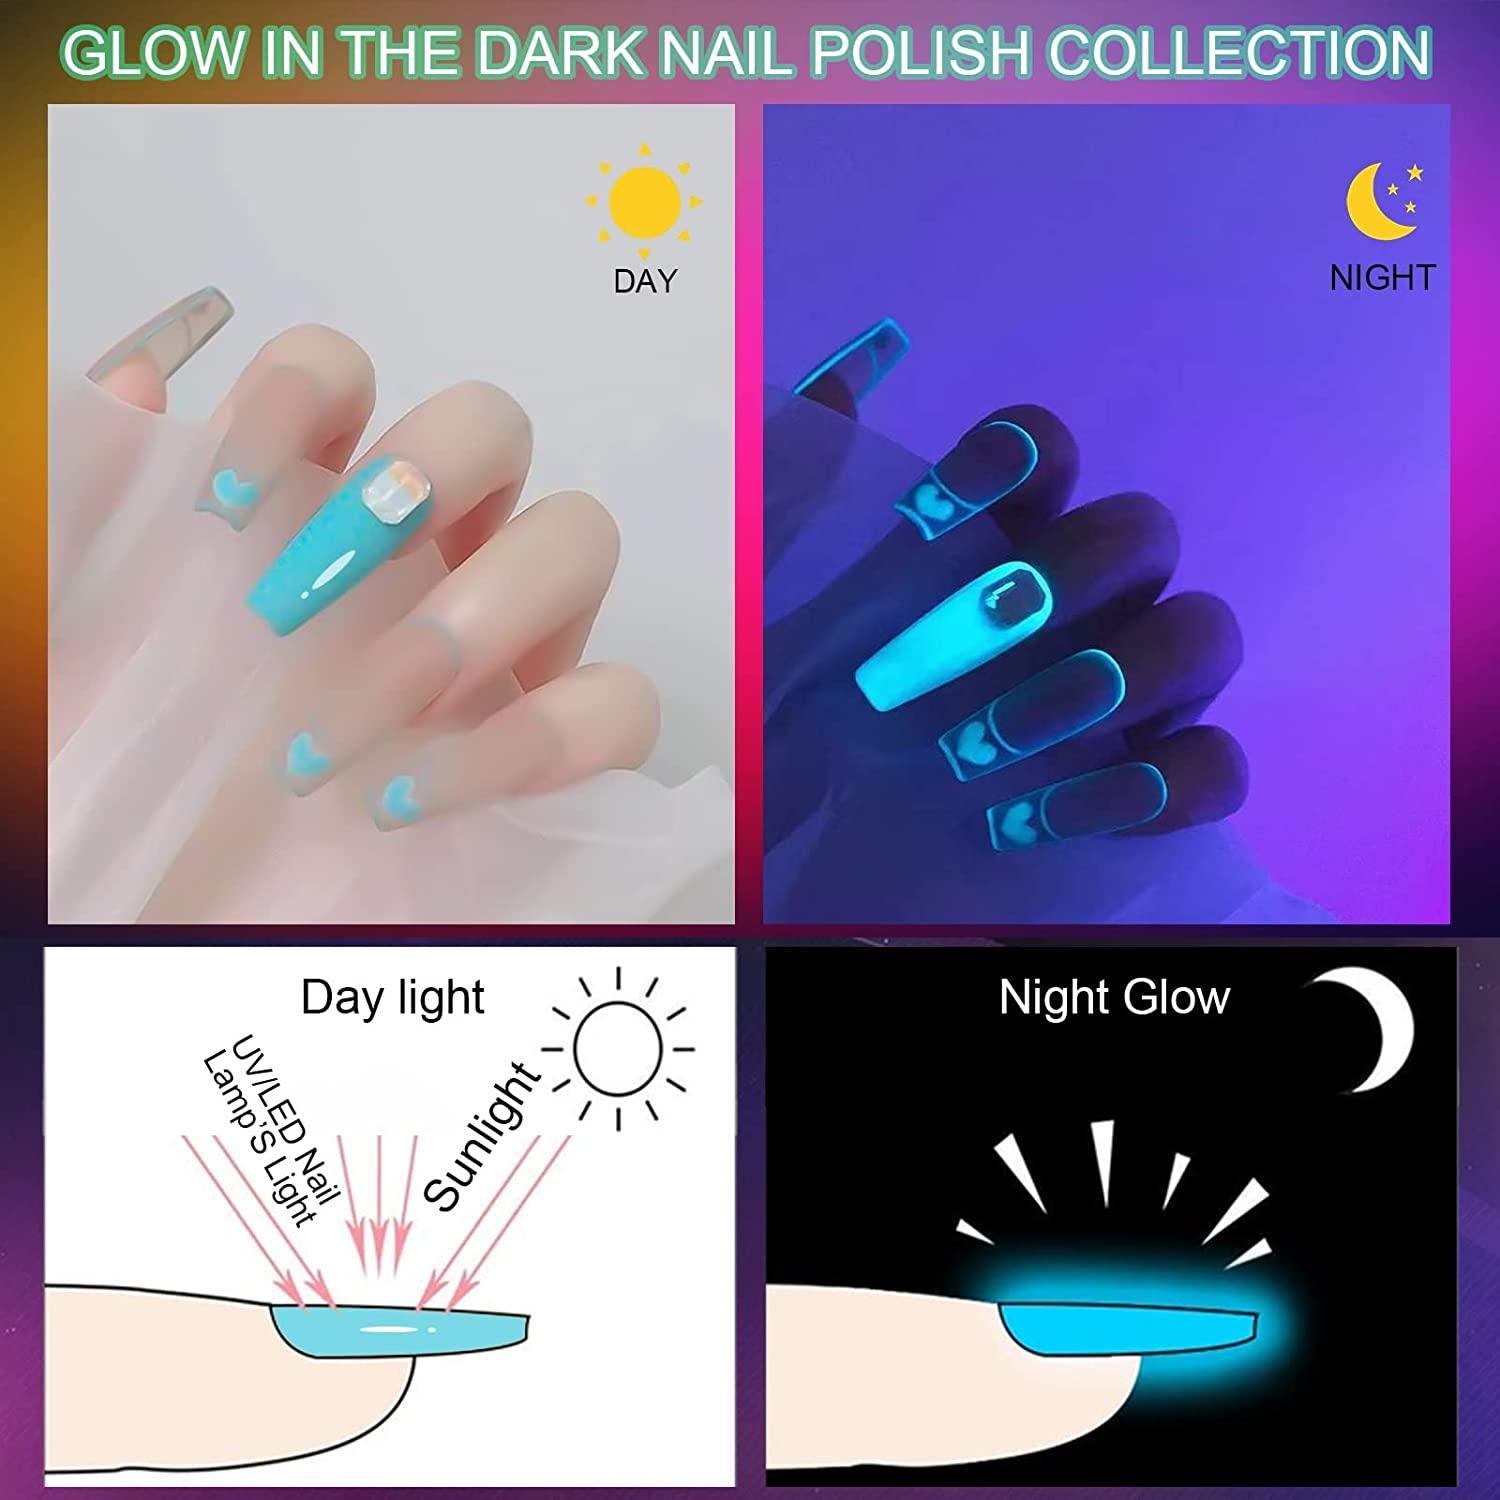 Buy Sinful Colors Professional Nail Polish Enamel GLOW IN THE DARK #1353  Online at Low Prices in India - Amazon.in